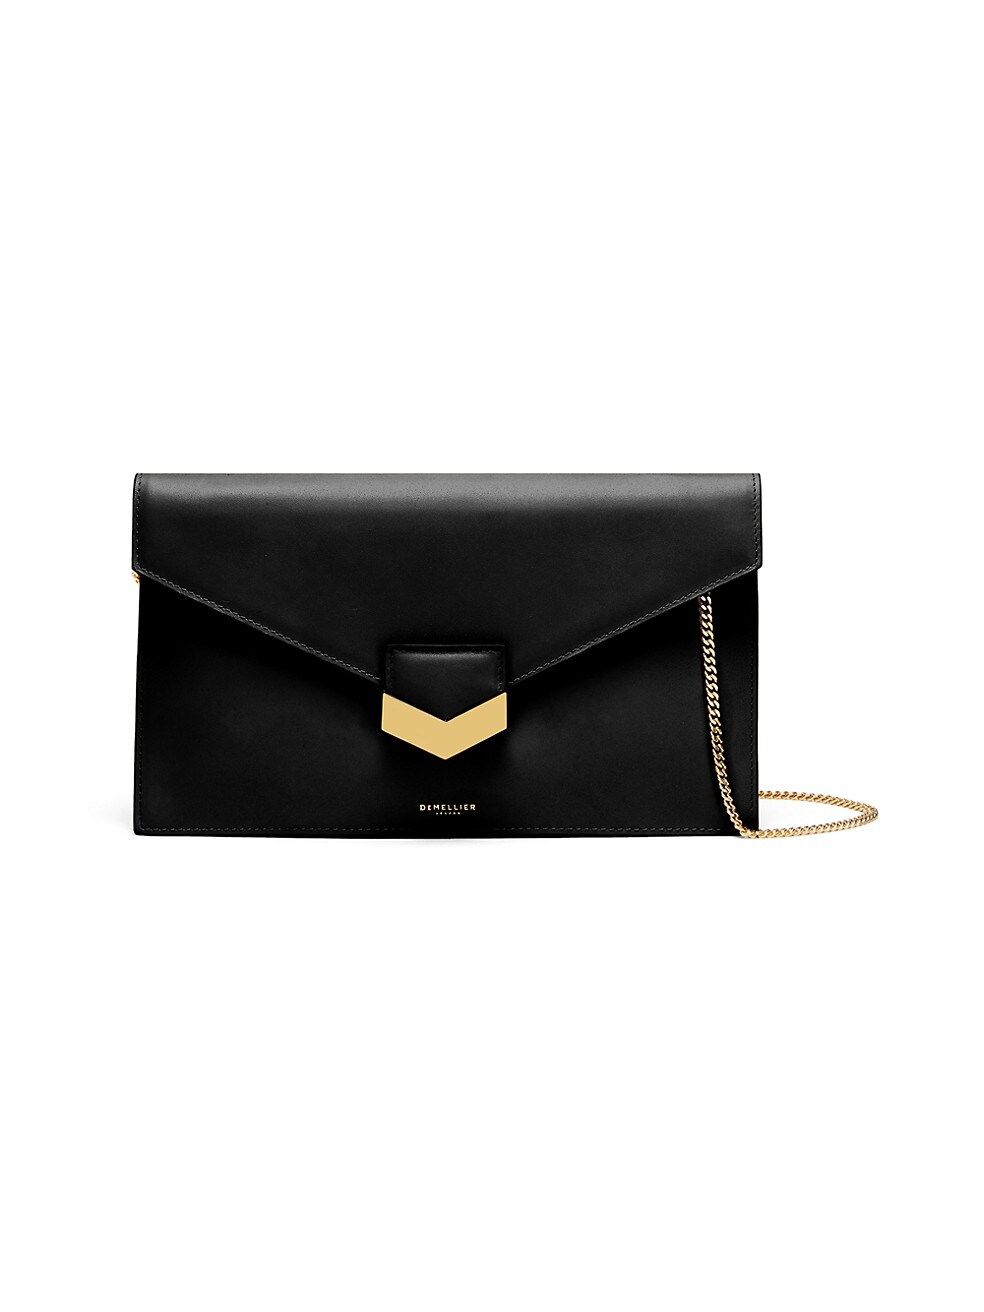 London Leather Clutch-On-Chain | Saks Fifth Avenue